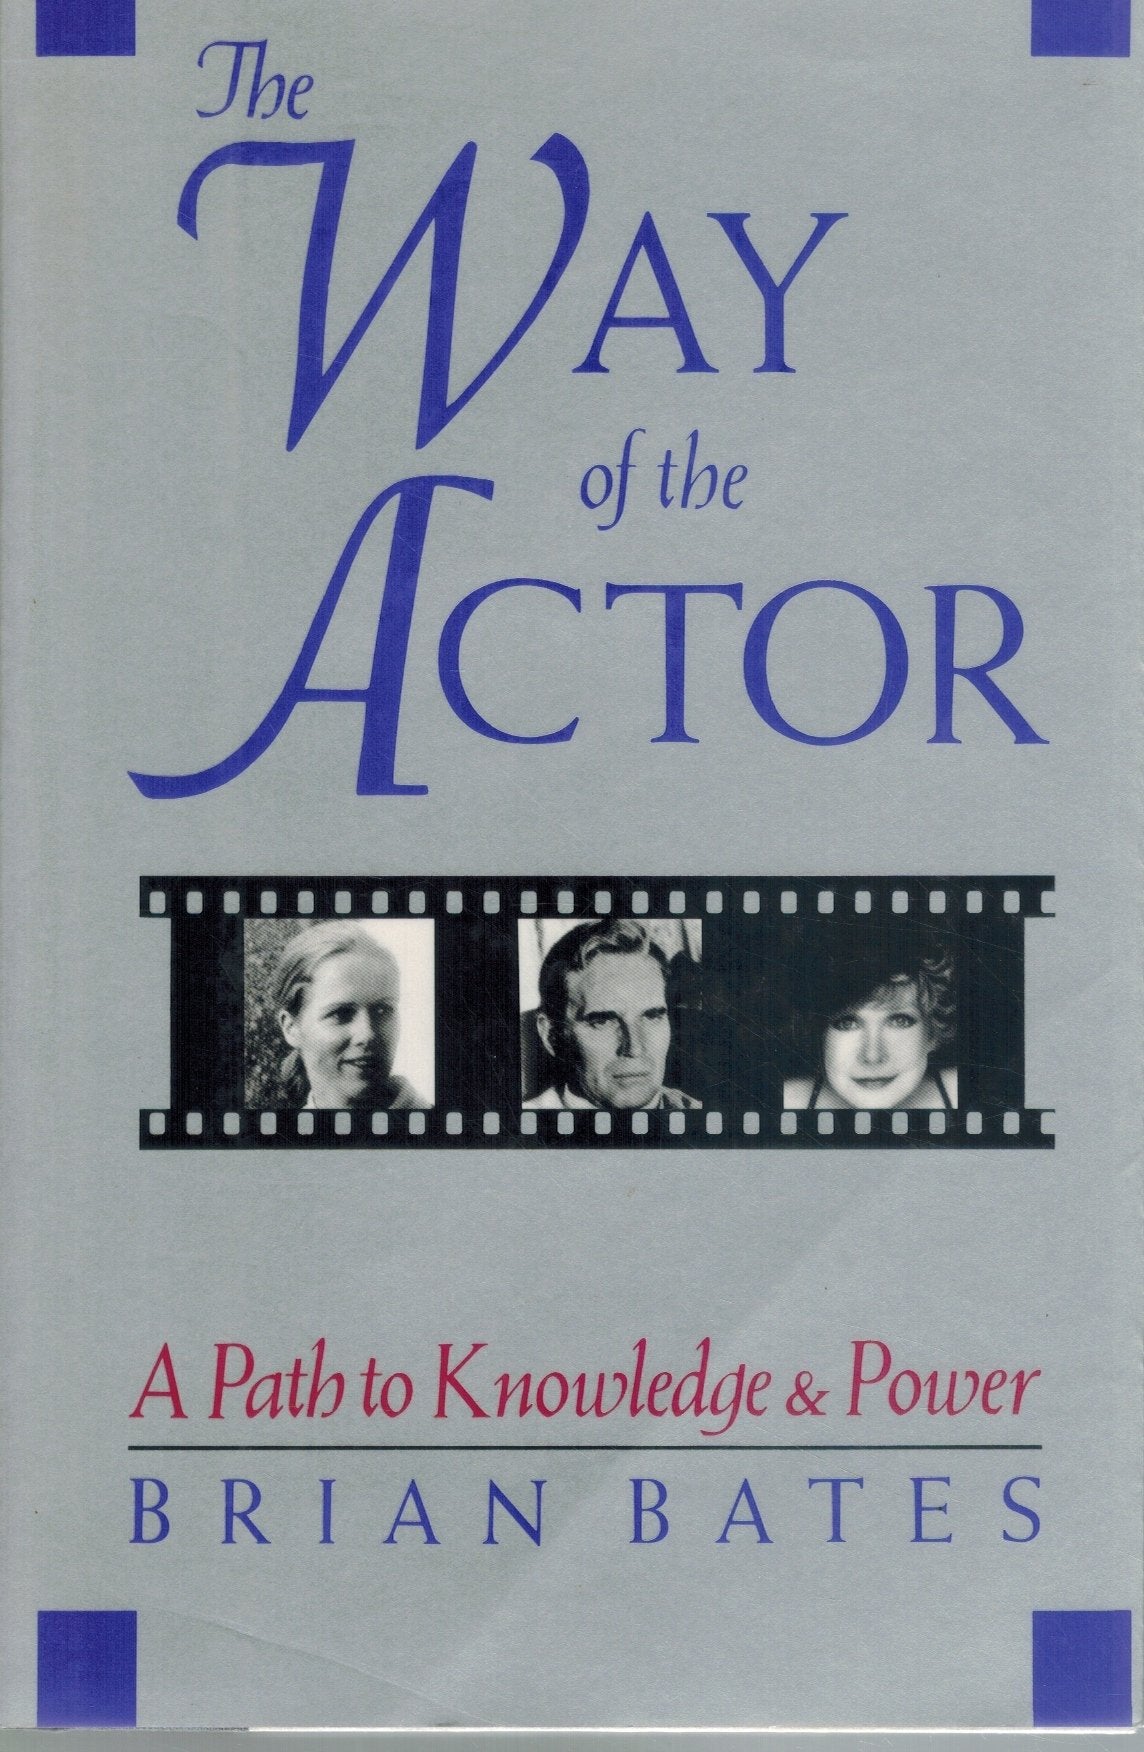 WAY OF THE ACTOR A Path to Knowledge and Power by Brian Bates  by Bates, Brian